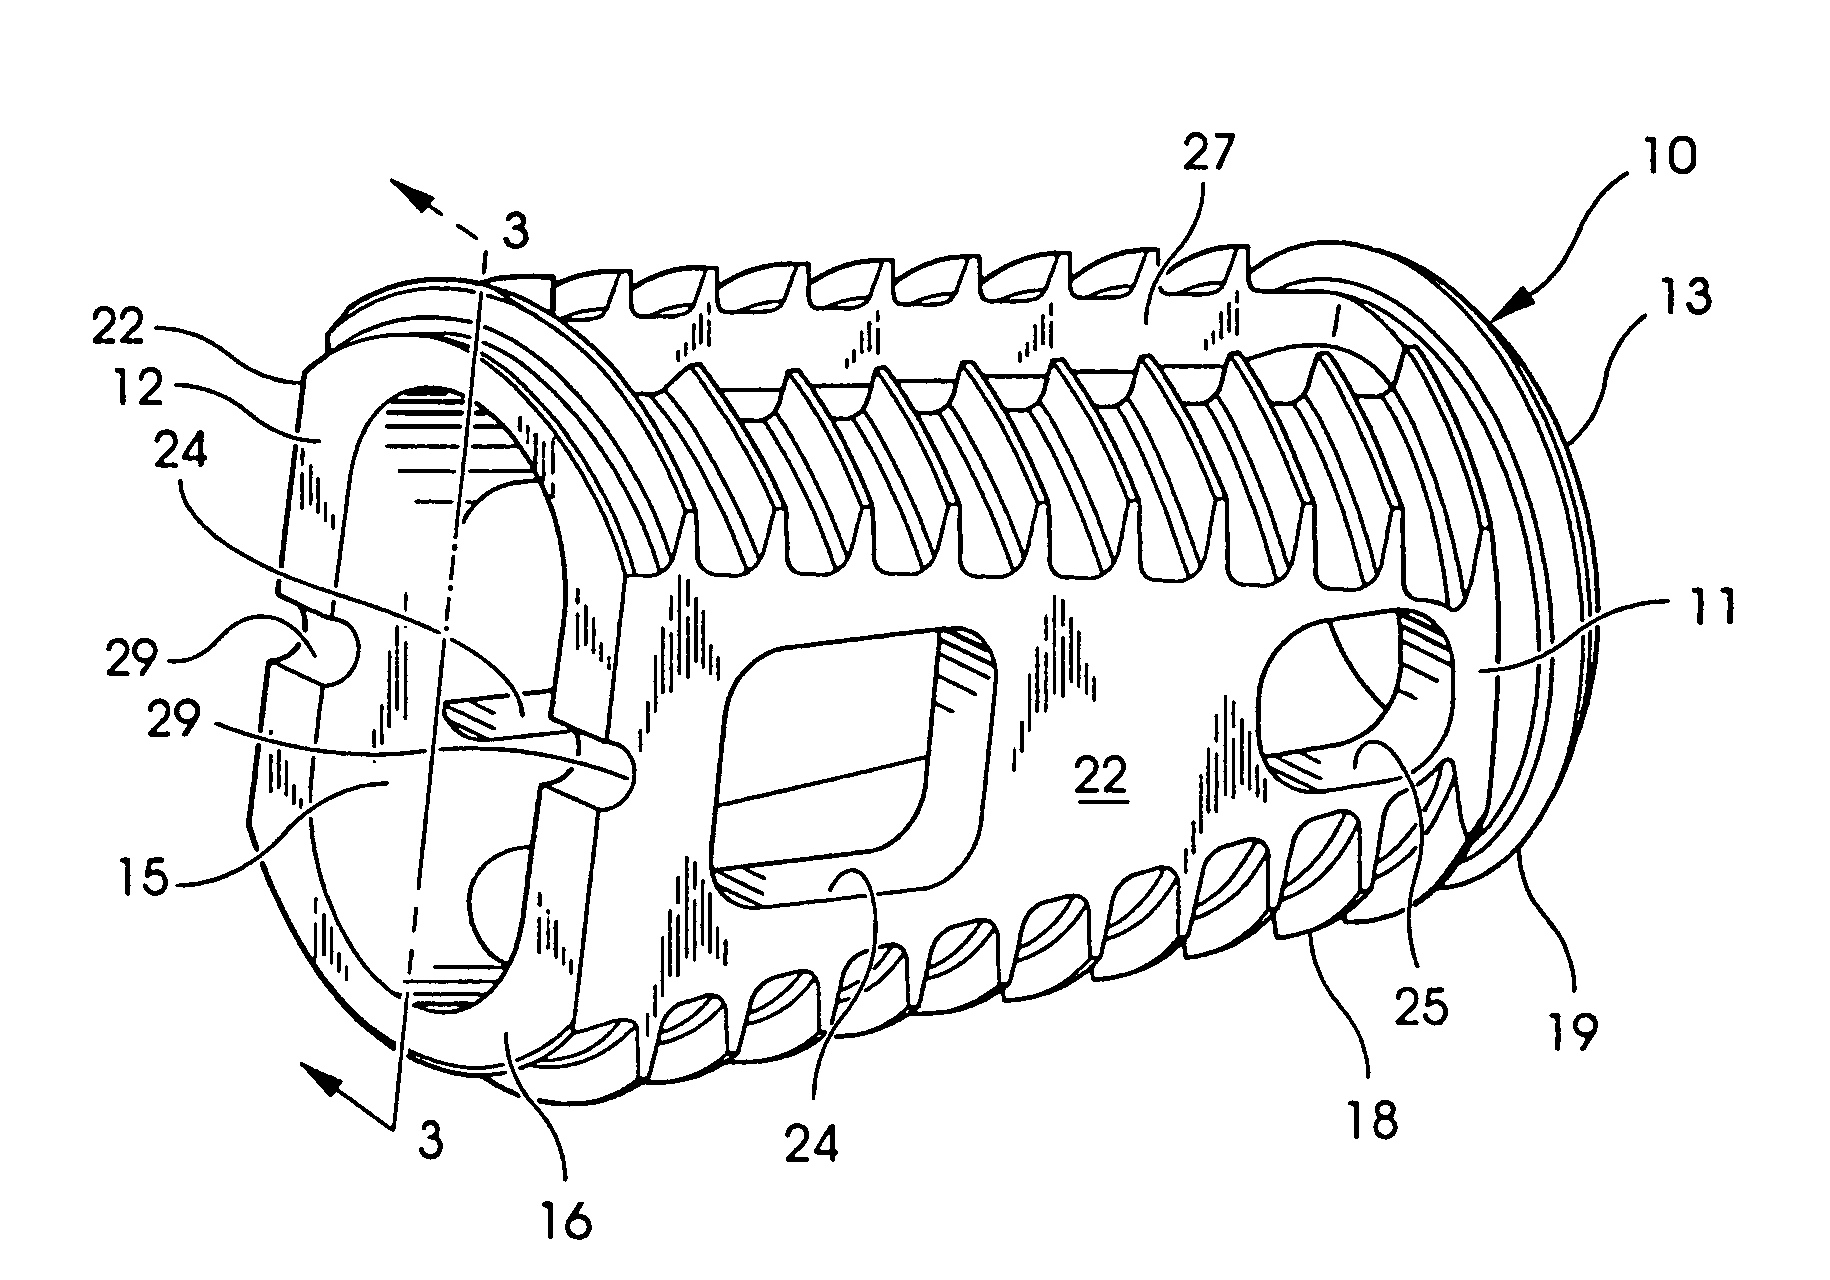 Interbody fusion device and method for restoration of normal spinal anatomy